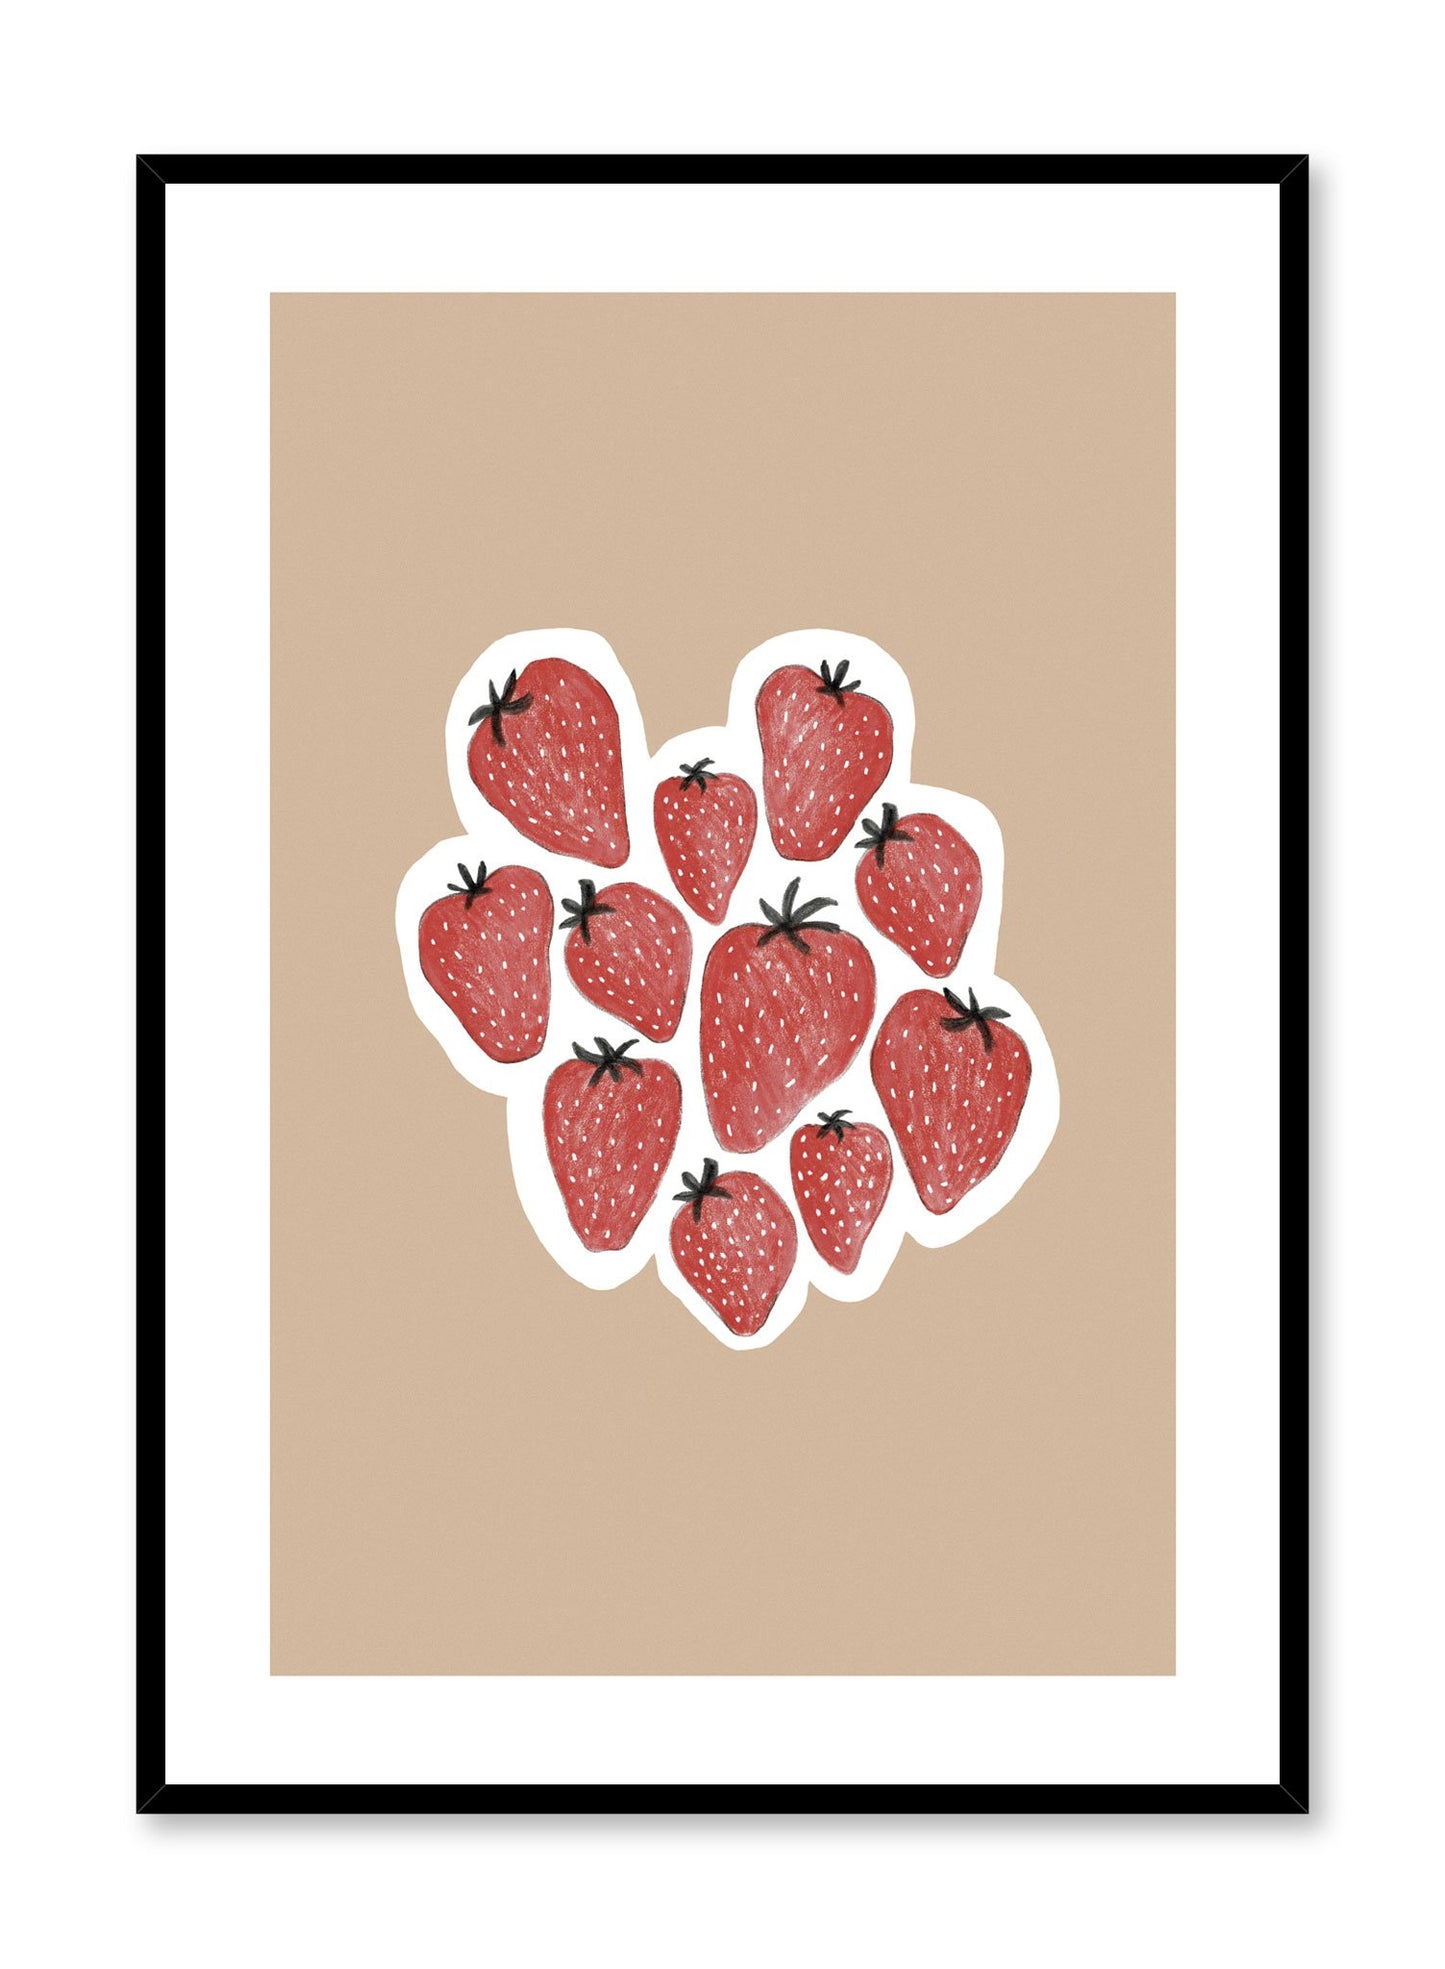 Minimalist poster by Opposite Wall with strawberries food illustration